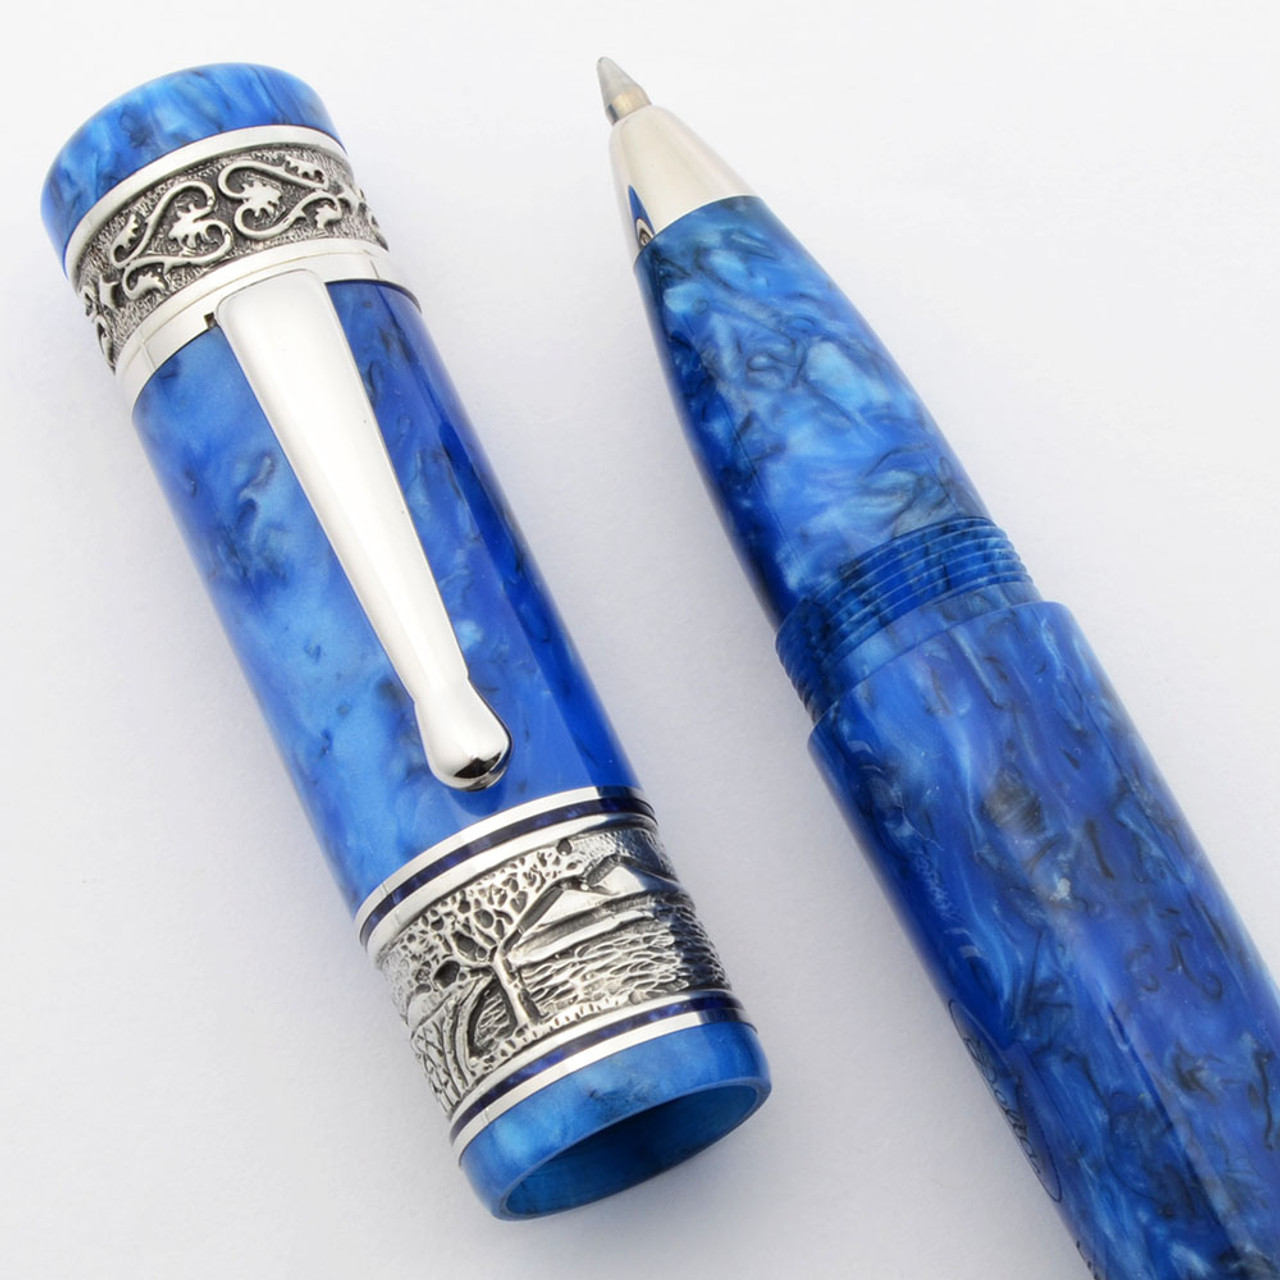 Delta Napoli LE Rollerball/Ballpoint Pen #091/100 (early 2000s) - FPH Exclusive, Blue Marble w/ Sterling Trim (Near Mint, Works Well)